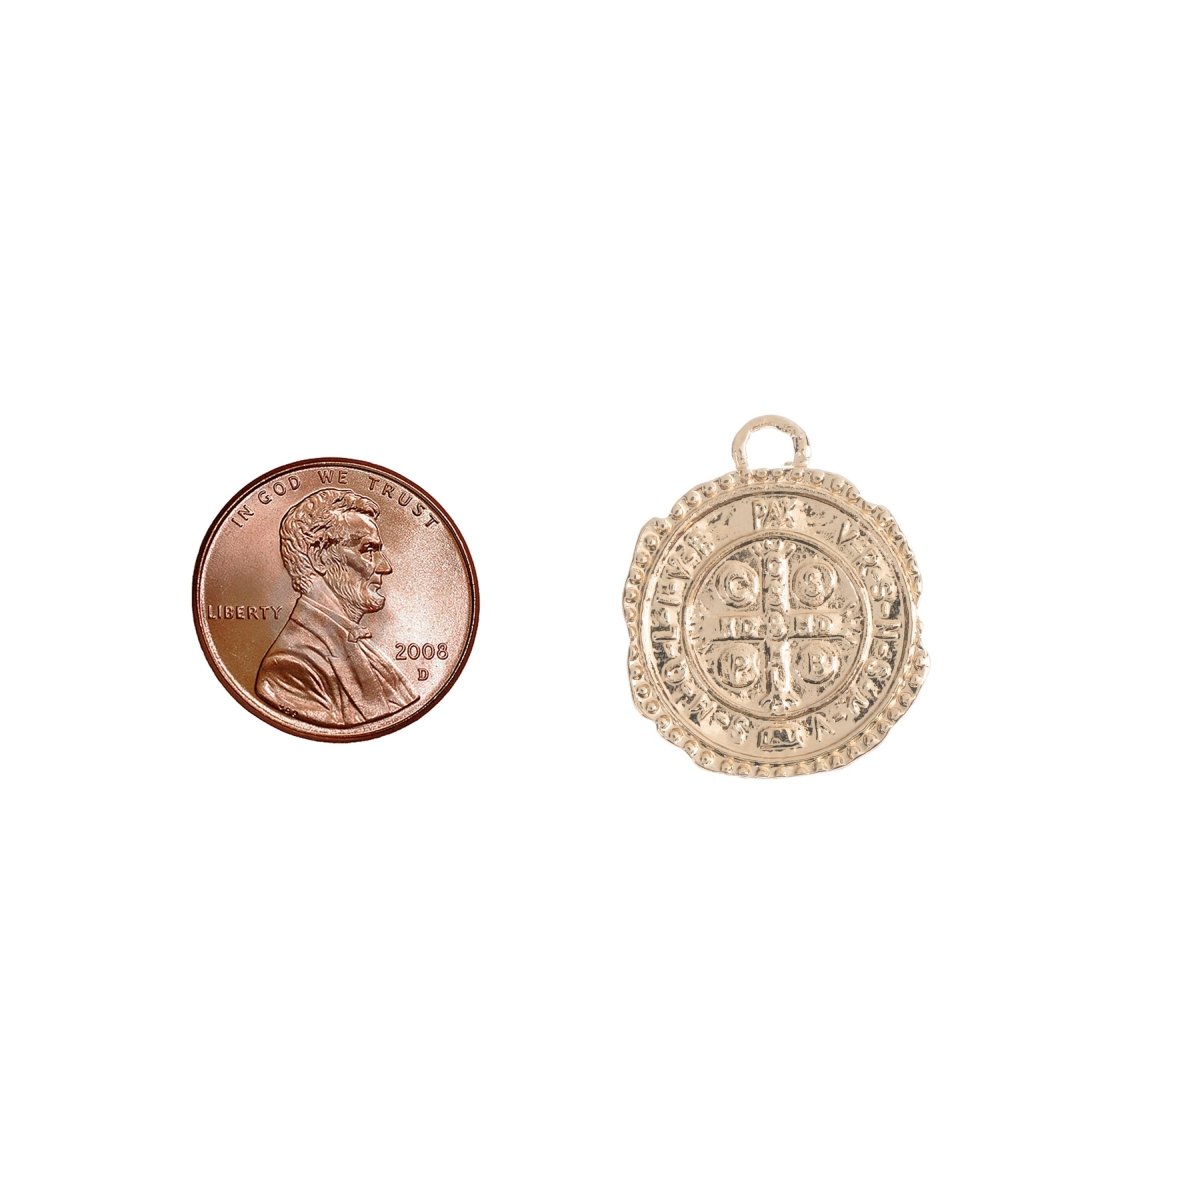 Dainty 18k Gold Filled Rustic Cross Coin Charm Vintage Medallion for Bracelet Necklace Pendant Earring Findings for Jewelry Making C-238 - DLUXCA